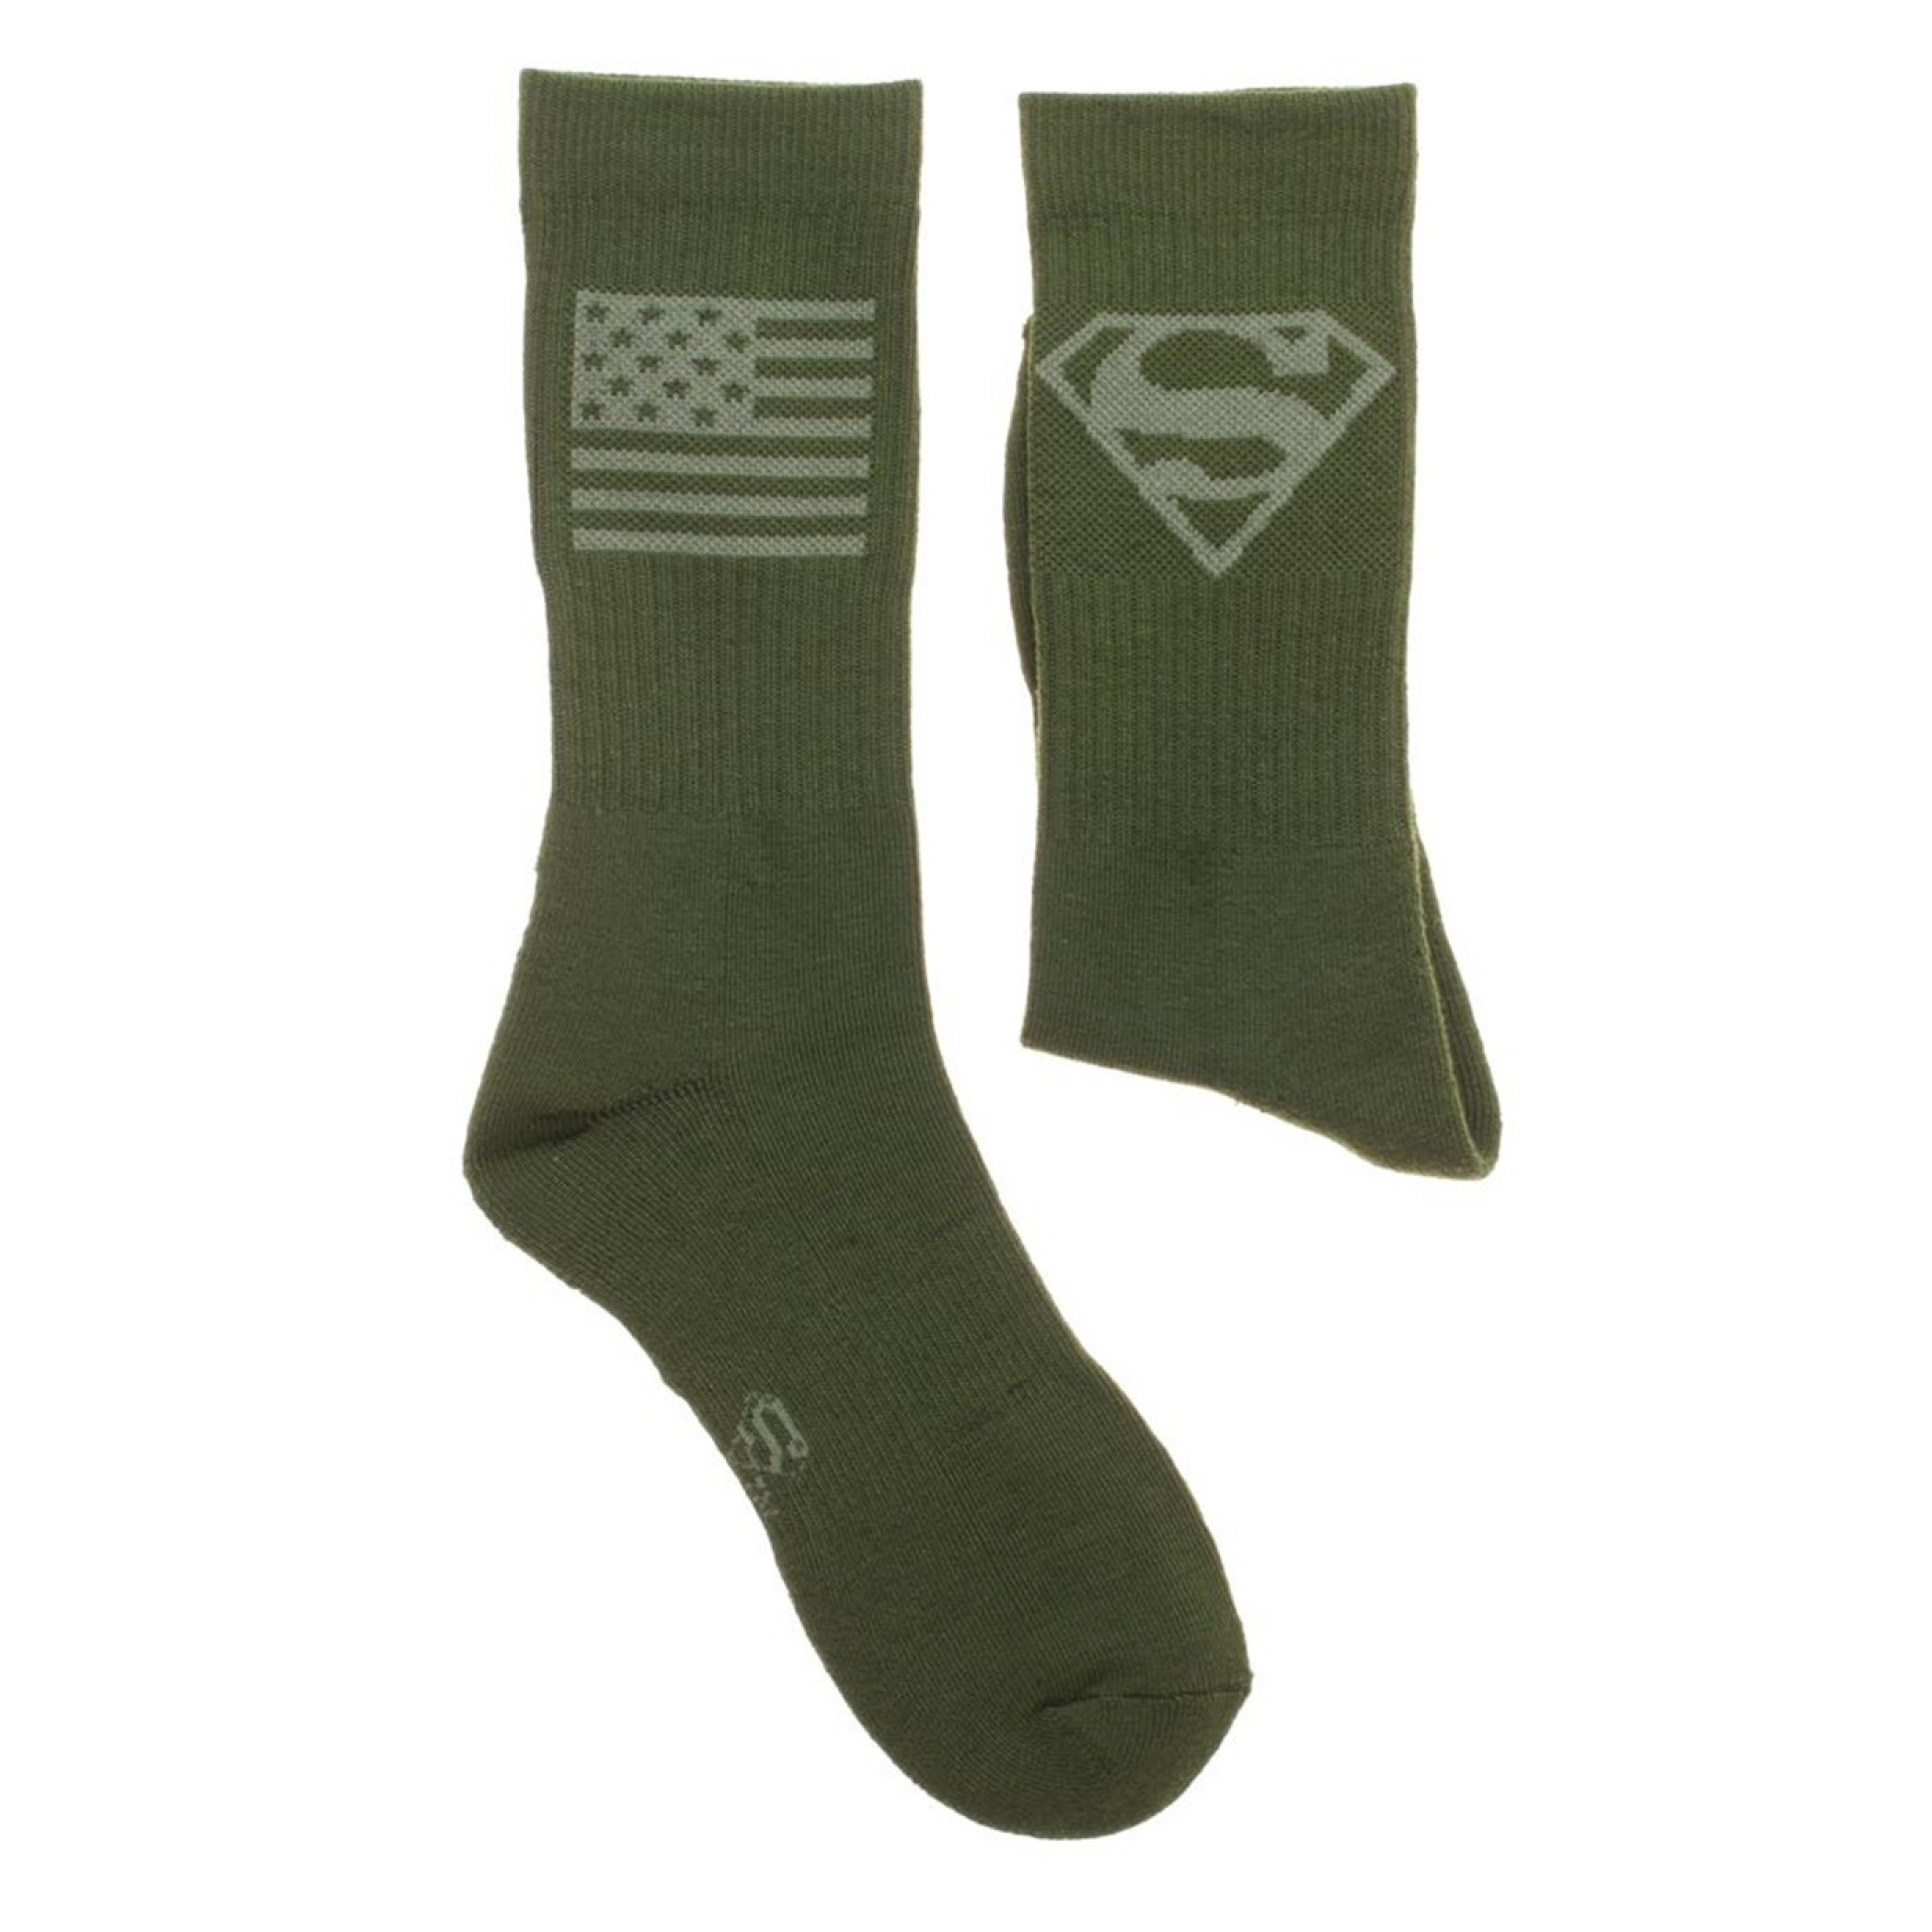 Superman and Wonder Woman Salute to Service Crew Socks 2-Pair Pack